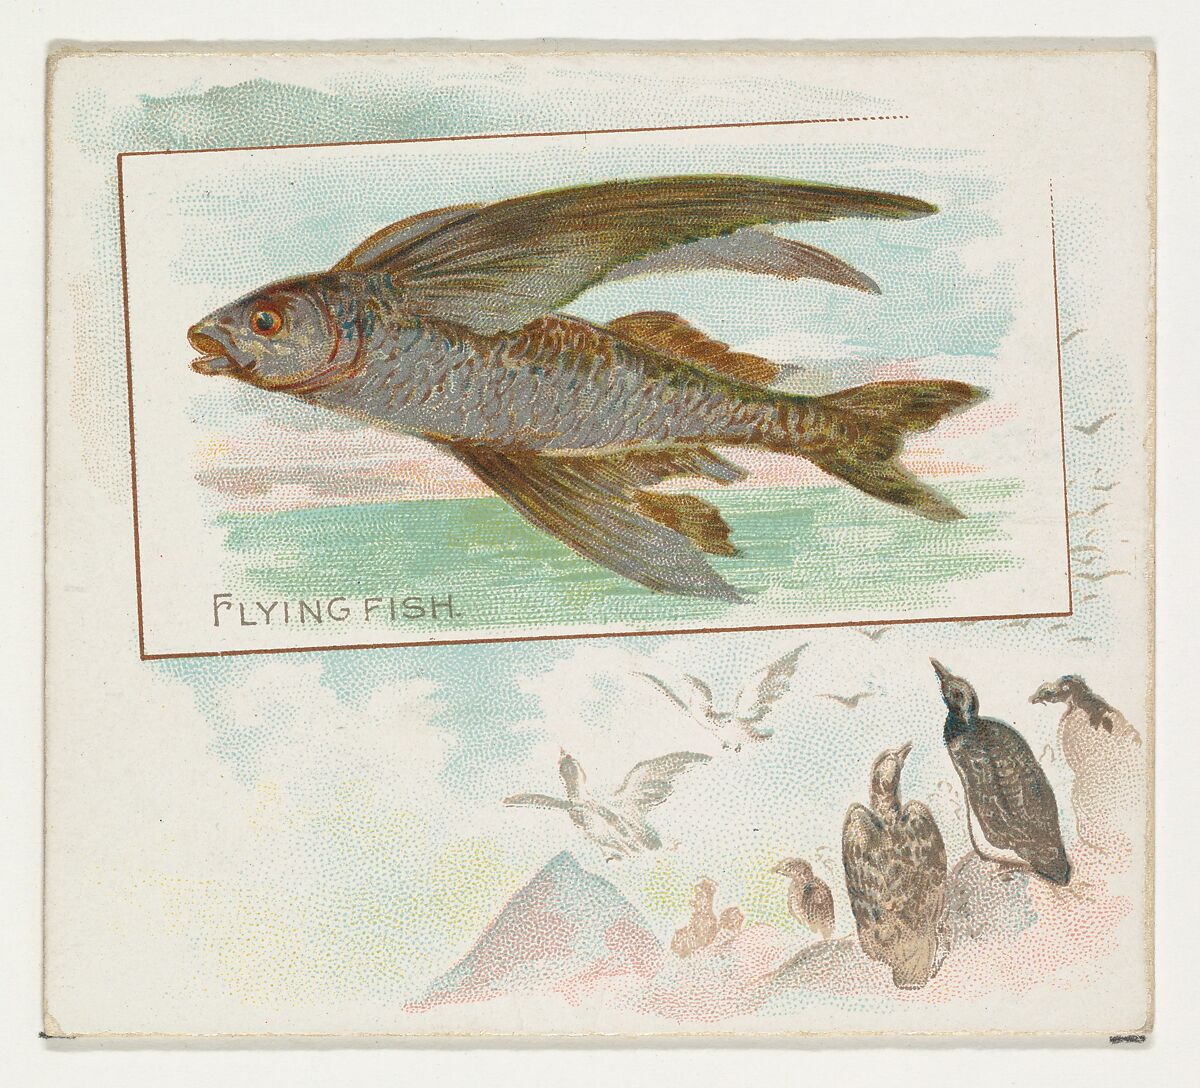 Flying Fish, from Fish from American Waters series (N39) for Allen & Ginter Cigarettes, Issued by Allen &amp; Ginter (American, Richmond, Virginia), Commercial color lithograph 